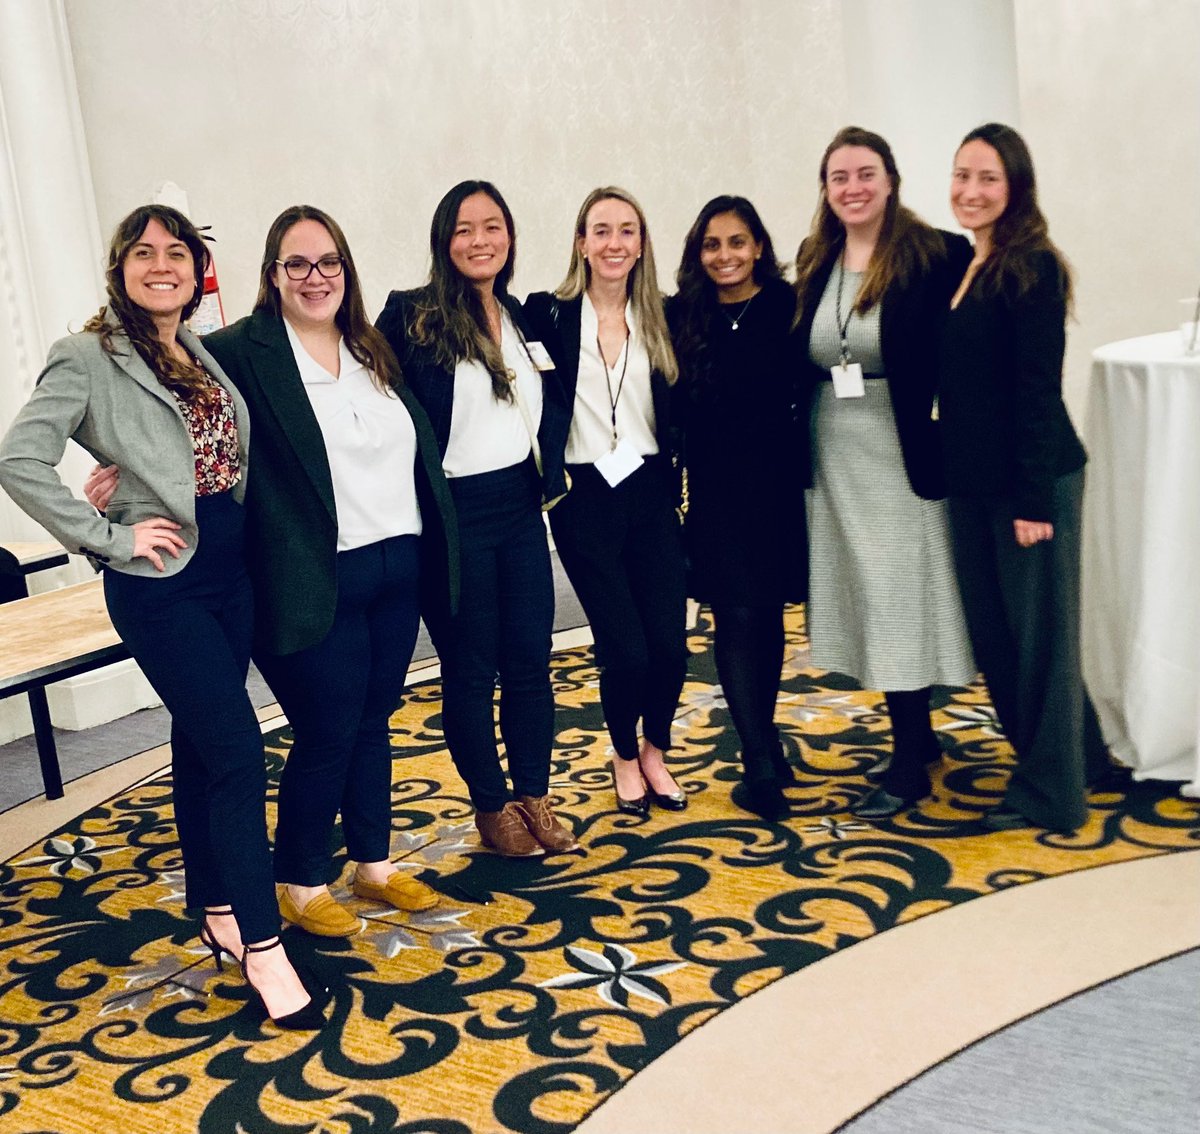 Bonded with this INCREDIBLE group of PGY-4 women in urologic oncology. Most of us are applying for SUO fellowships this year so please be on the lookout! Made possible by #WUO @UroOnc @durant_adri @BeckySagerMDPhD @REWhiteMD @LinaPosadaCald @spsutkaMD @SimaPorten @AmyLuckenbaugh